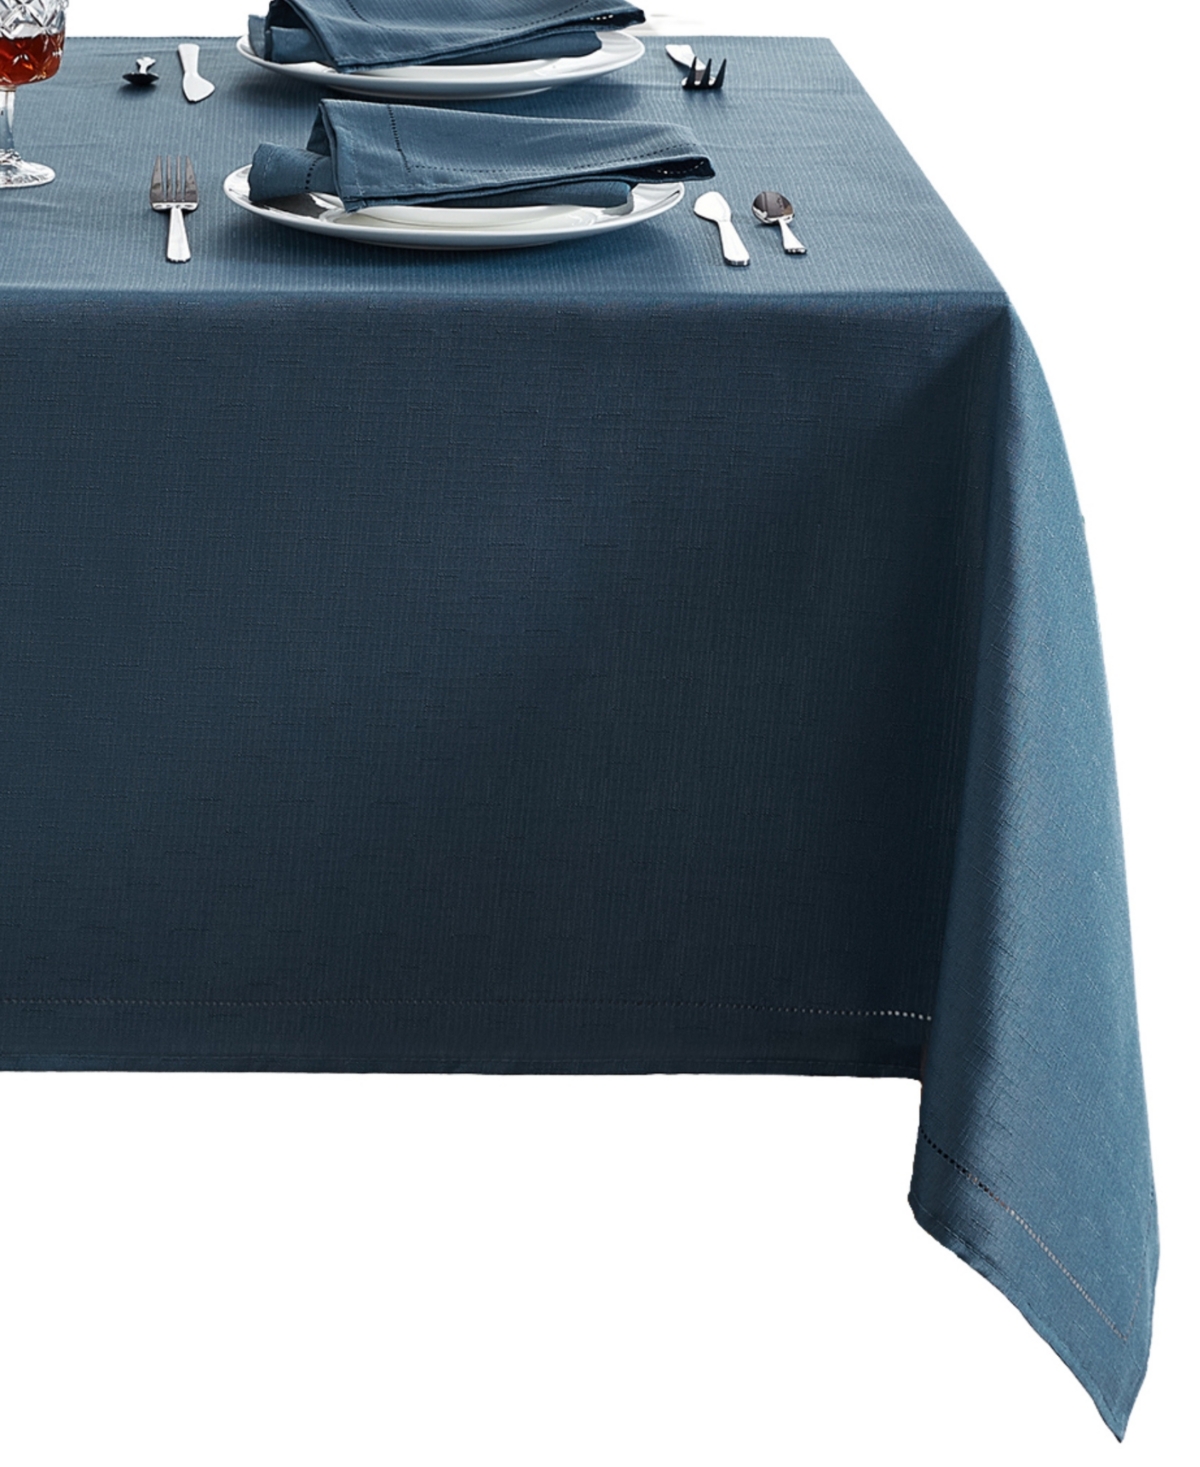 Elrene Alison Eyelet Punched Border Fabric Tablecloth, 60" X 102" In Copen Blue